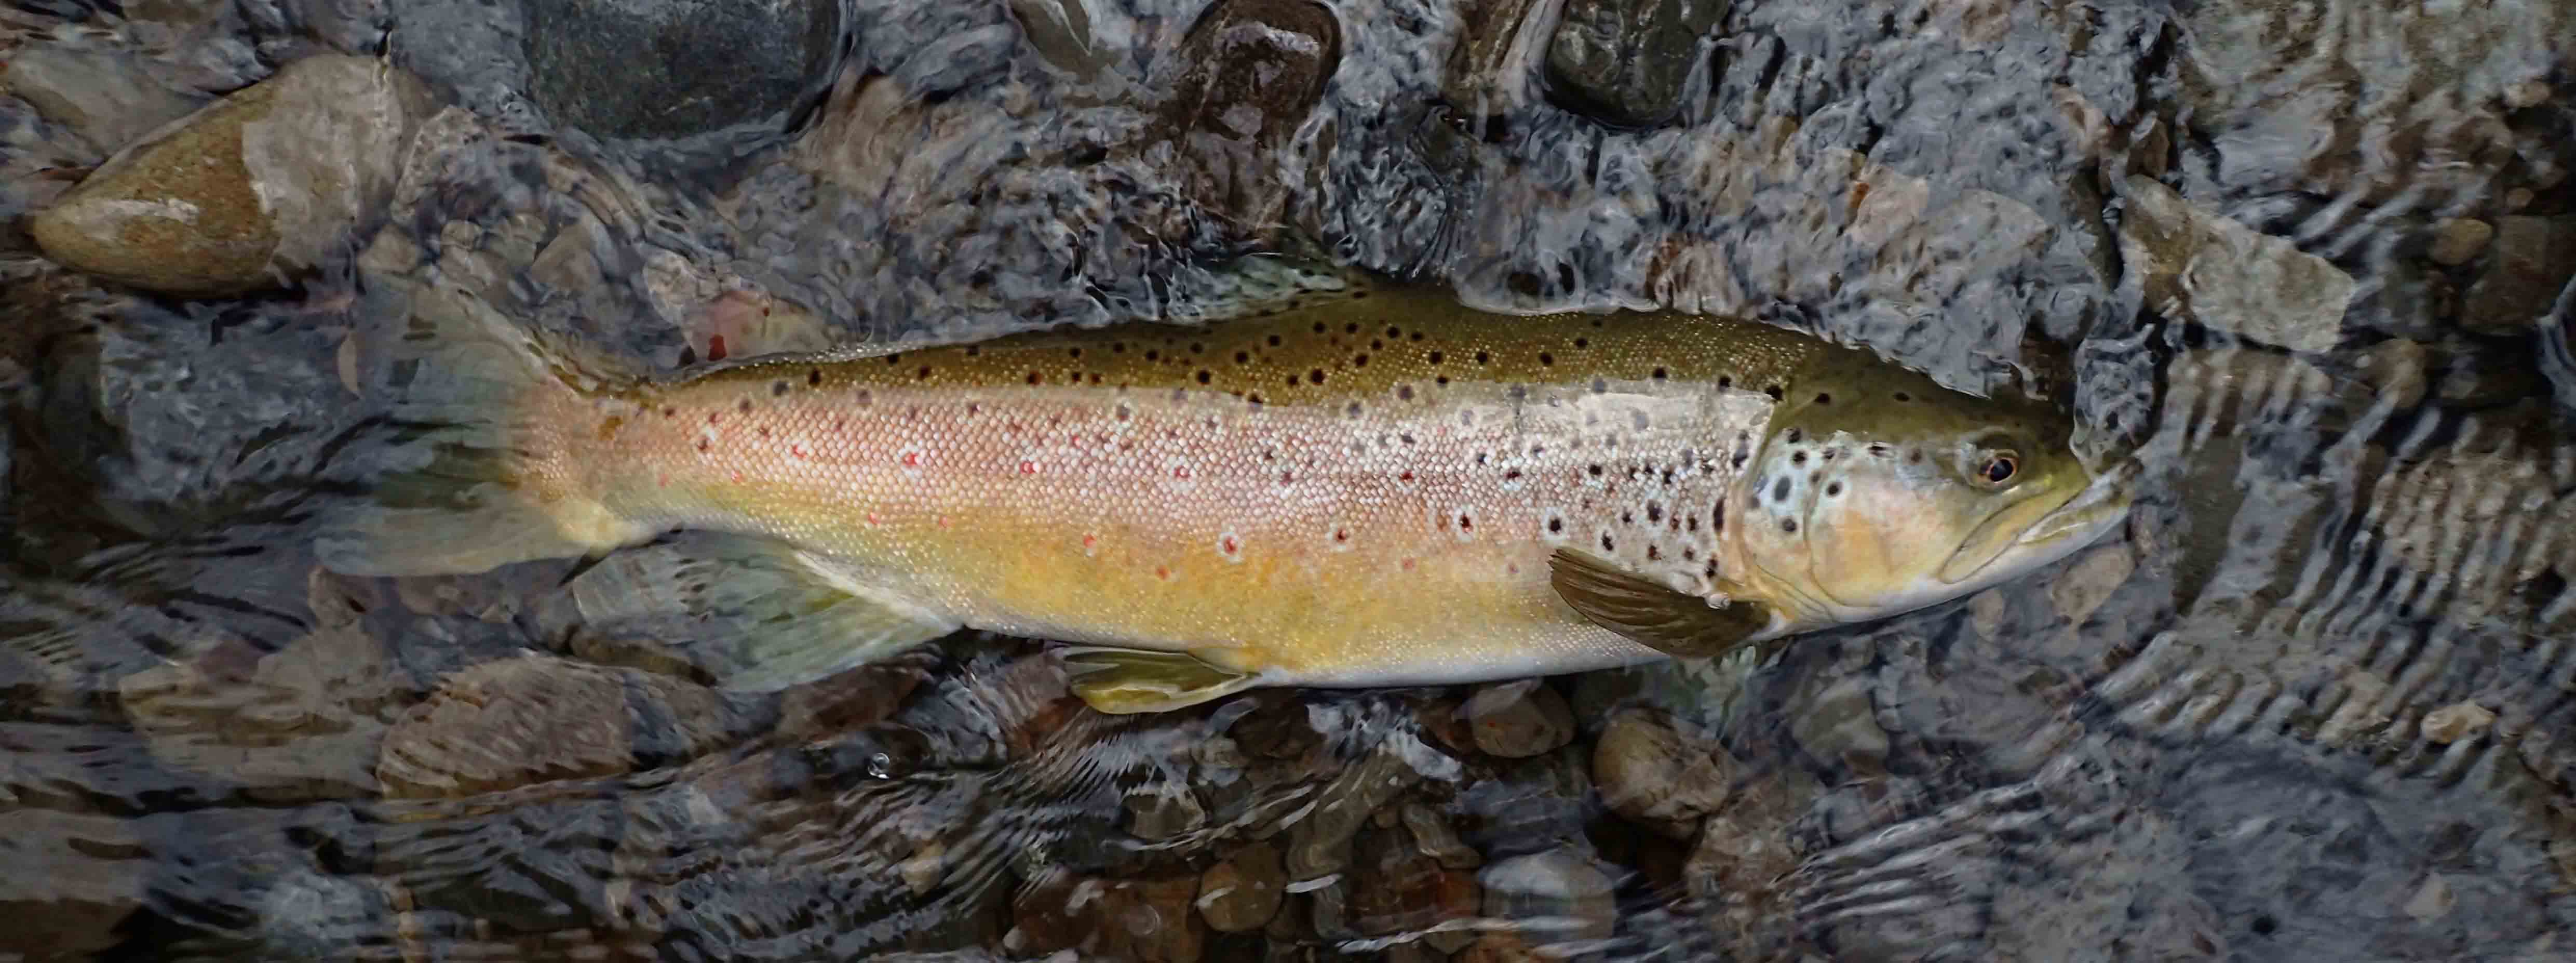 healthy, sleek and beautiful golden and bronze bronzed brown trout posed in shallows or river before being released